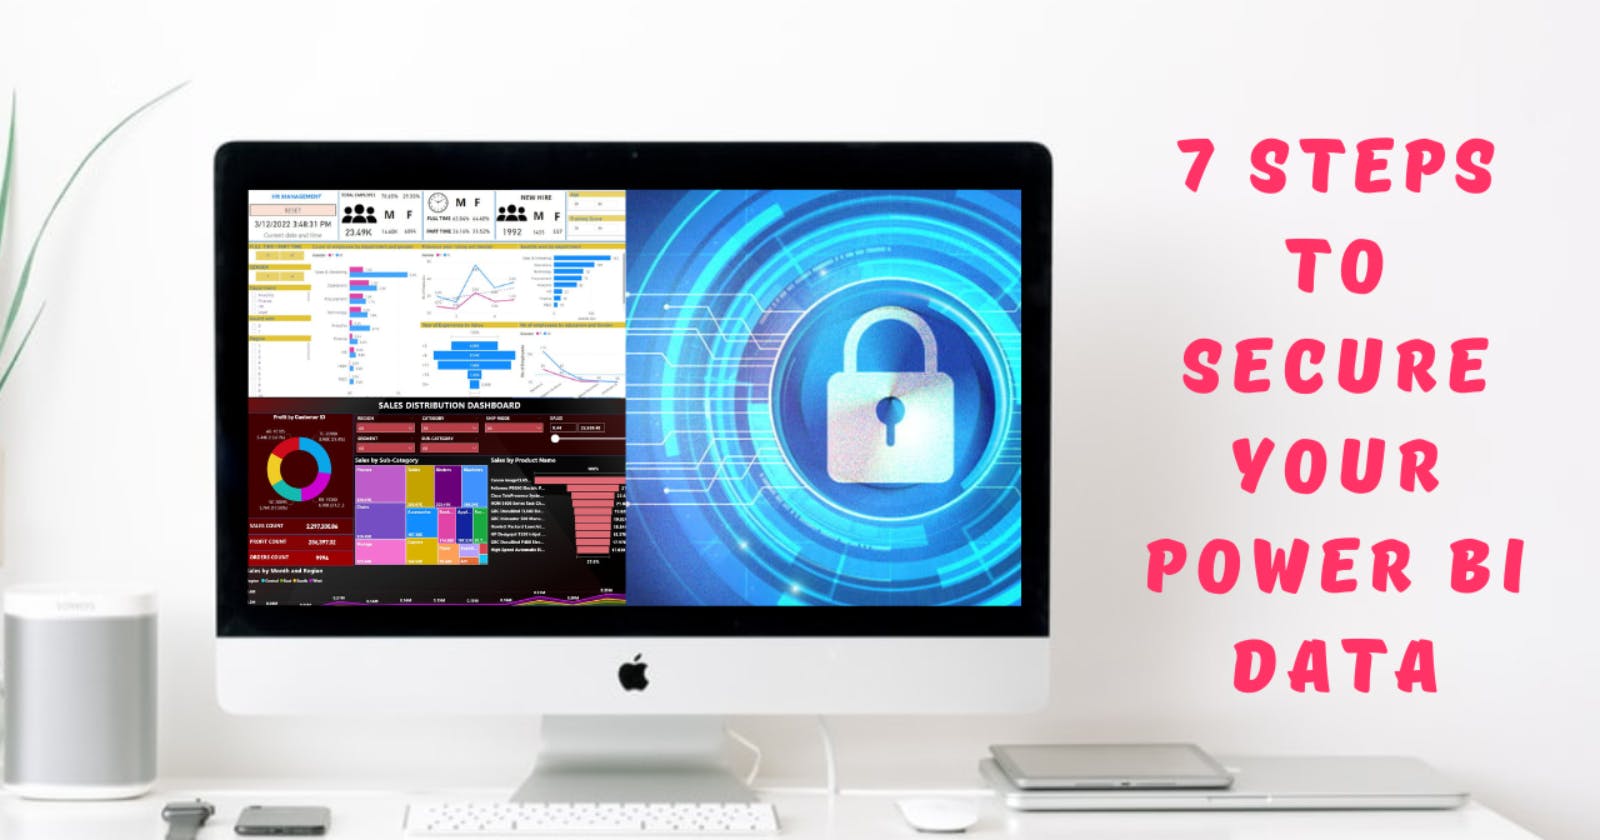 7 Steps to Secure Your Power BI Data